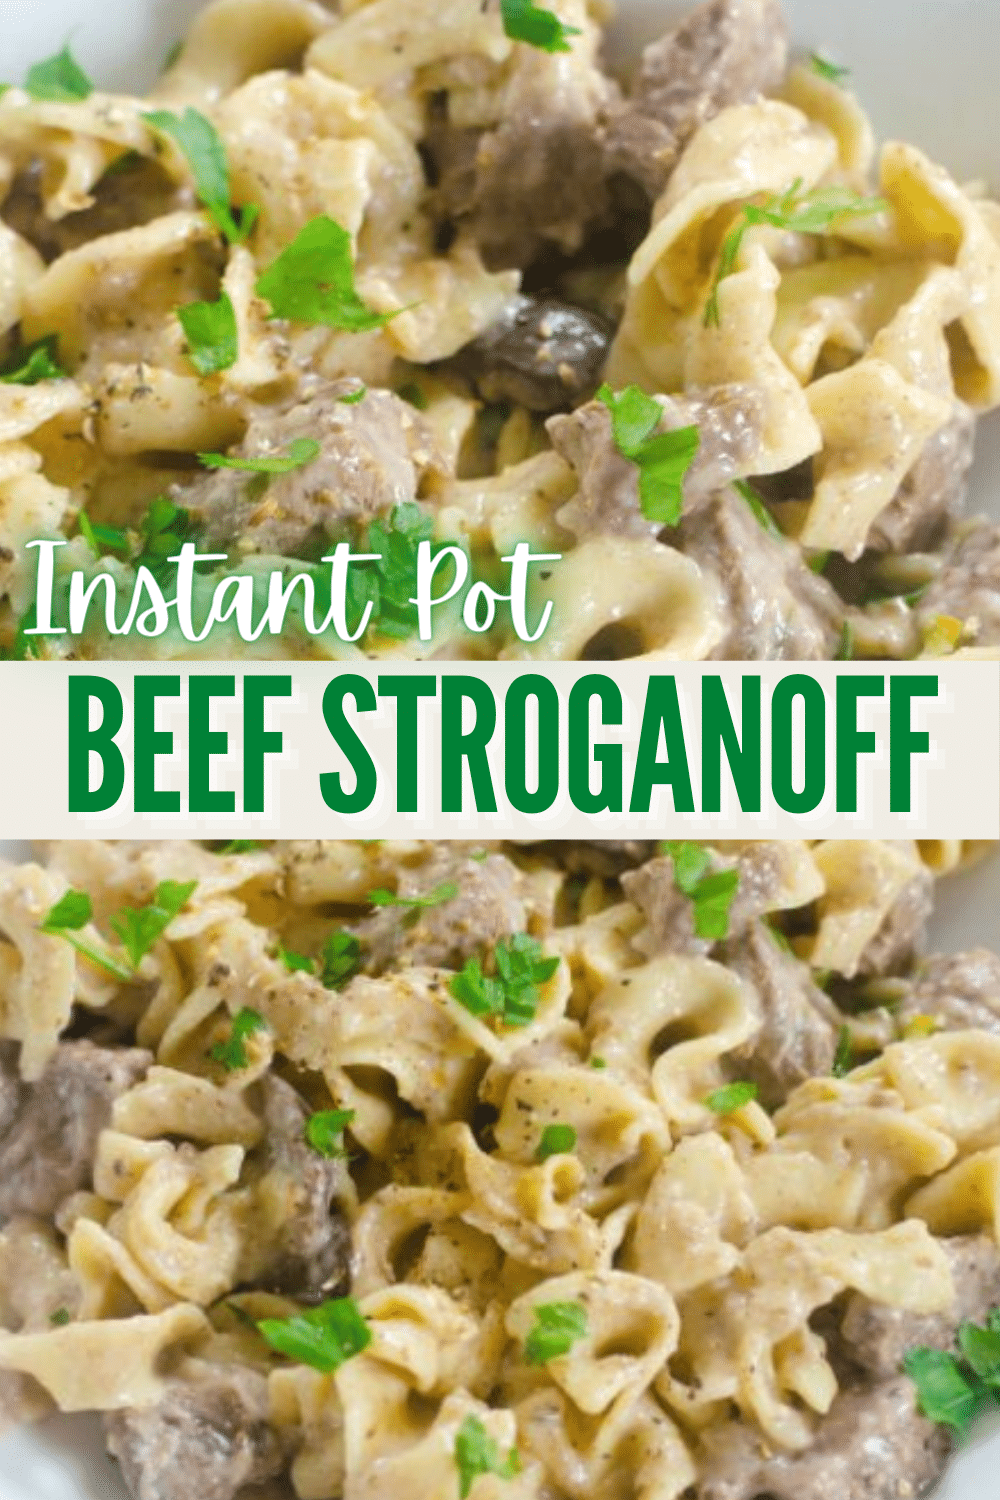 There are many recipes that bring comfort and feel like classic family favorites. This Instant Pot Beef Stroganoff is one of them. #instantpot #pressurecooker #beefstroganoff #beefrecipe via @wondermomwannab